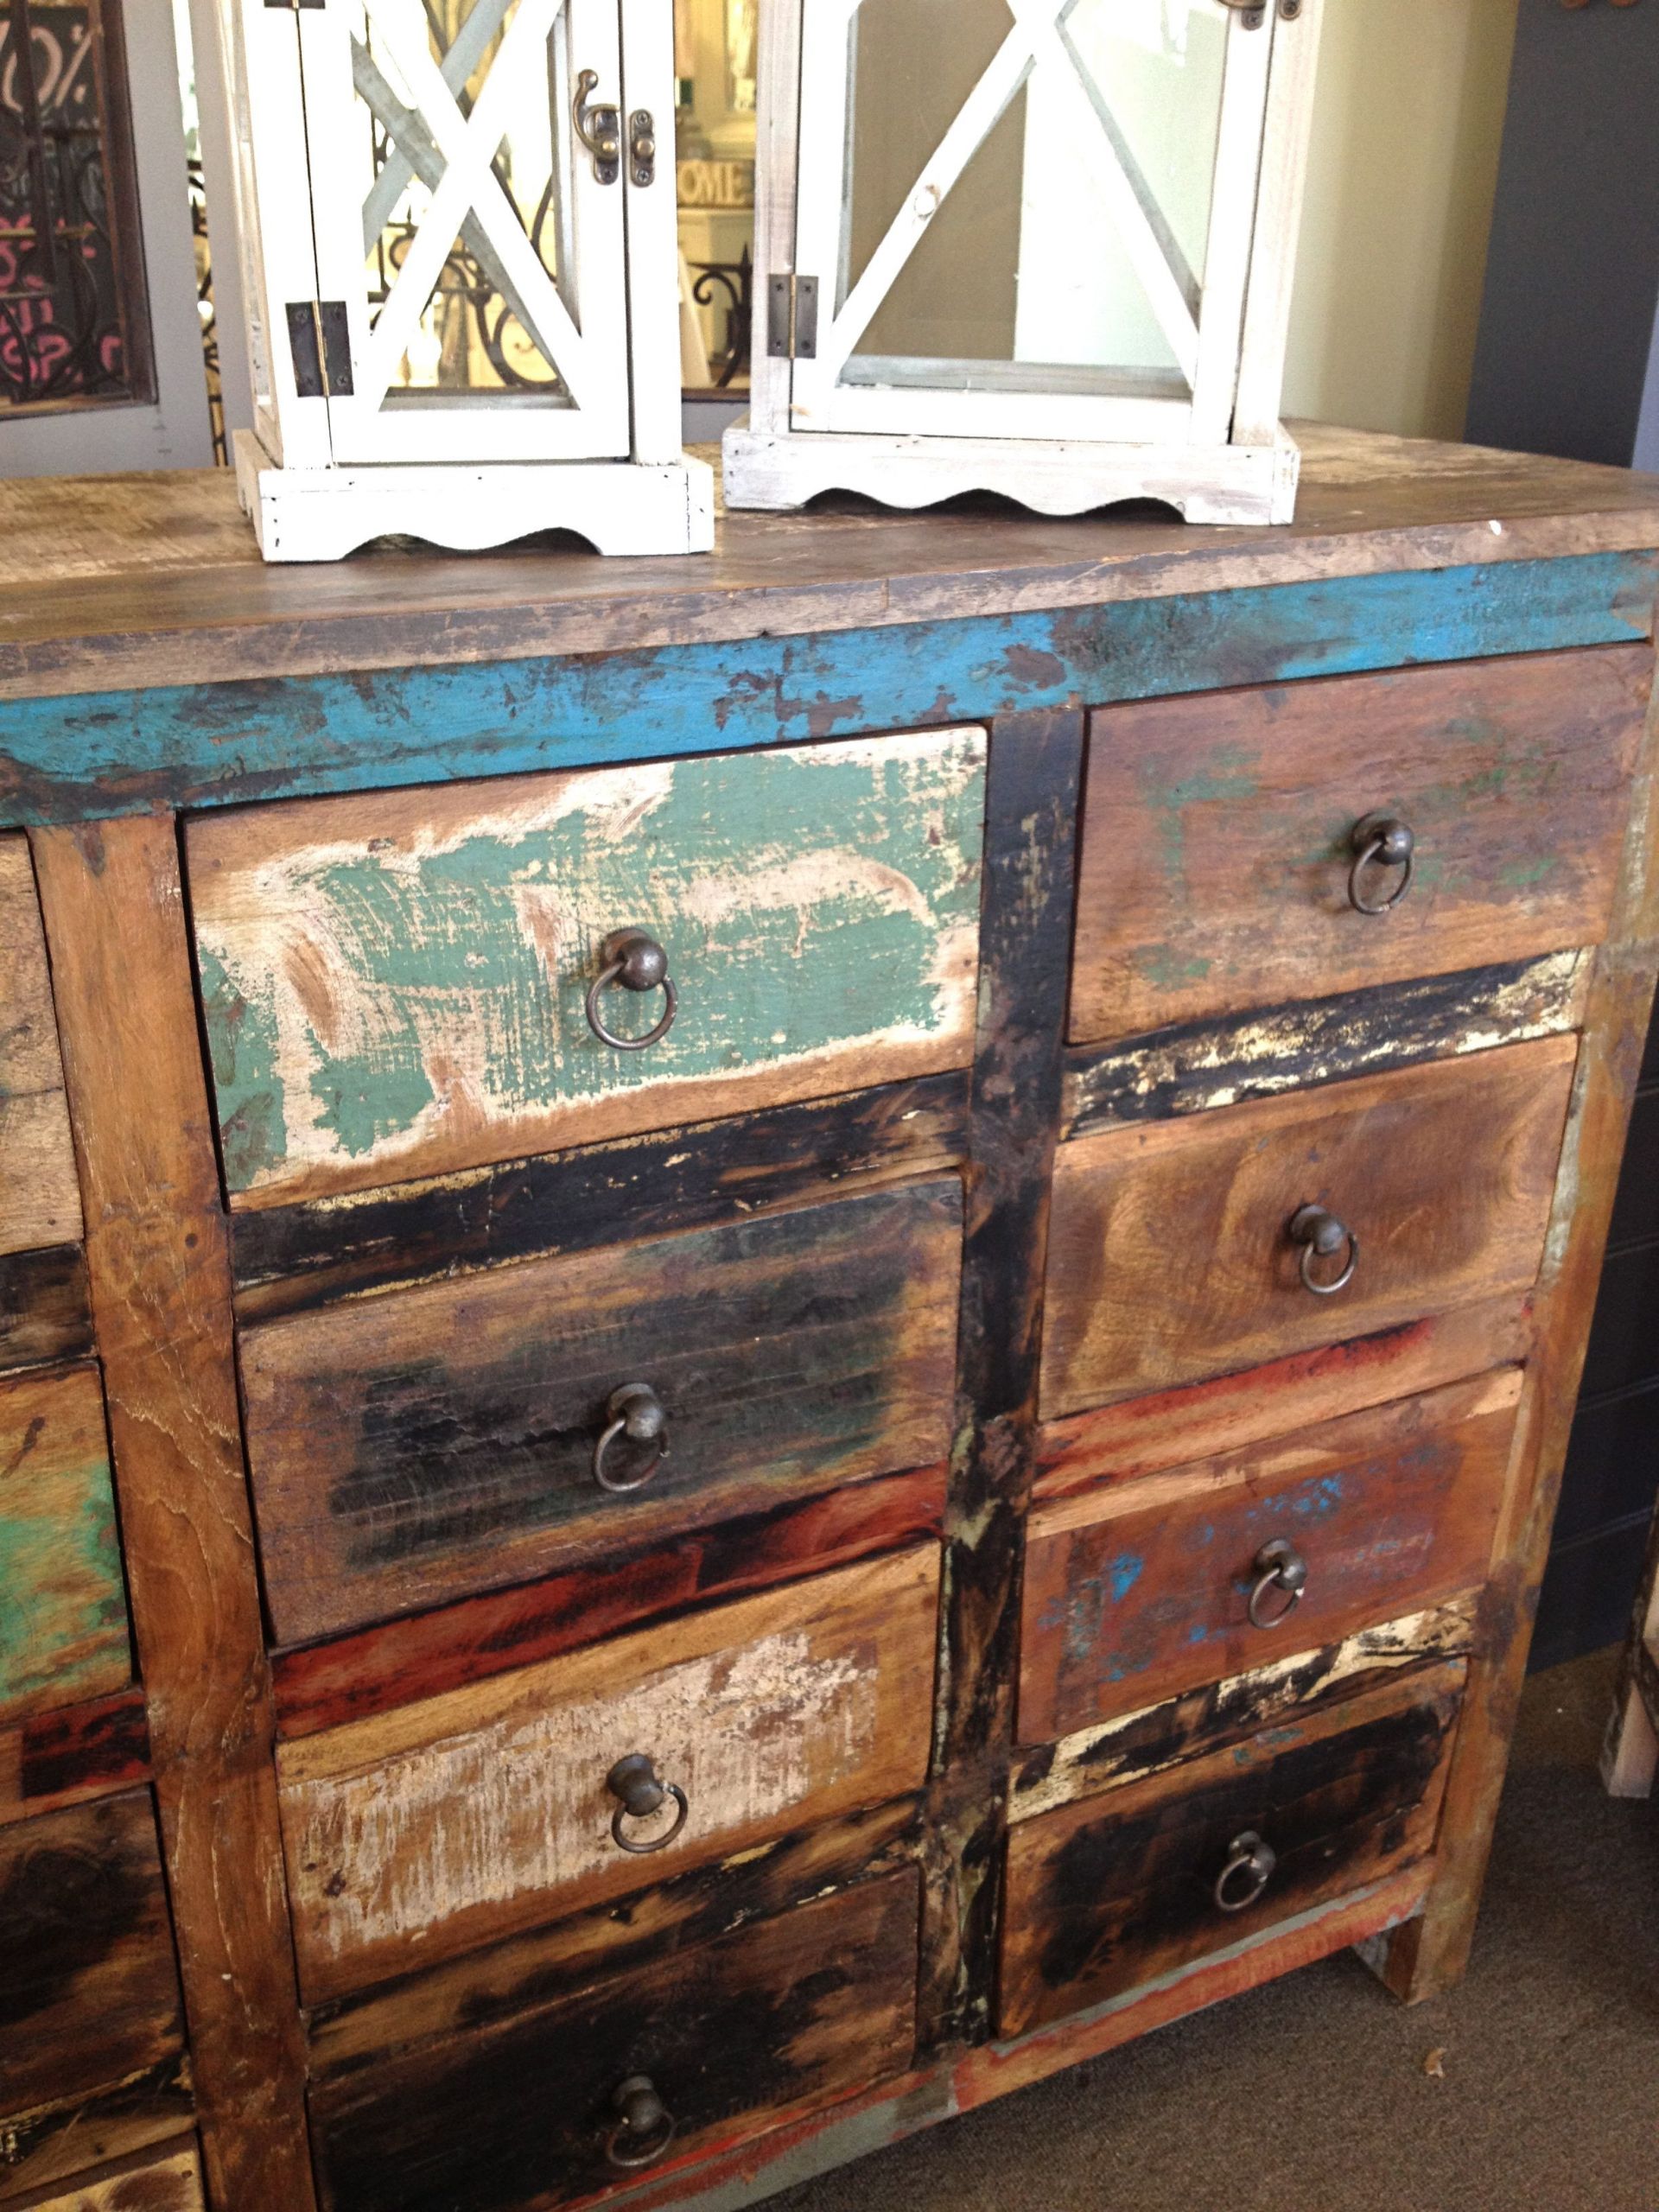 DIY Distressed Wood Furniture
 Distressed Wood Furniture Creating Lovely Rustic Charm